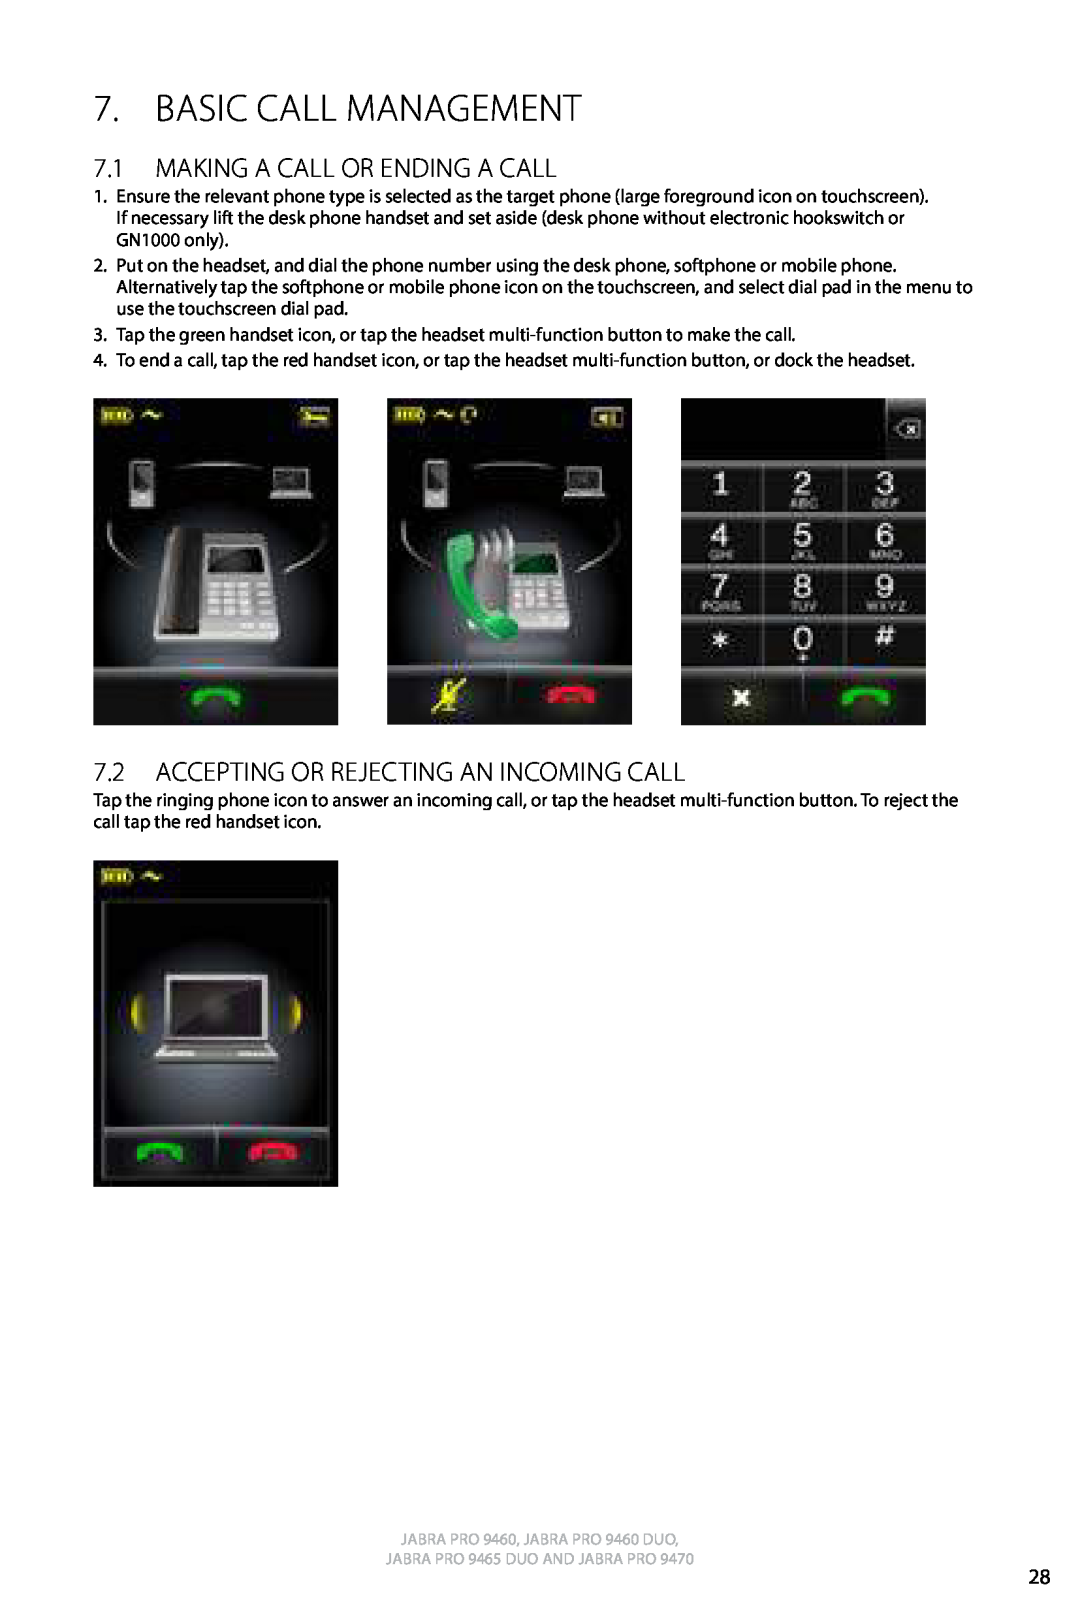 Jabra 9460 user manual Basic Call Management, Making a Call or Ending a Call, Accepting or Rejecting an Incoming Call 